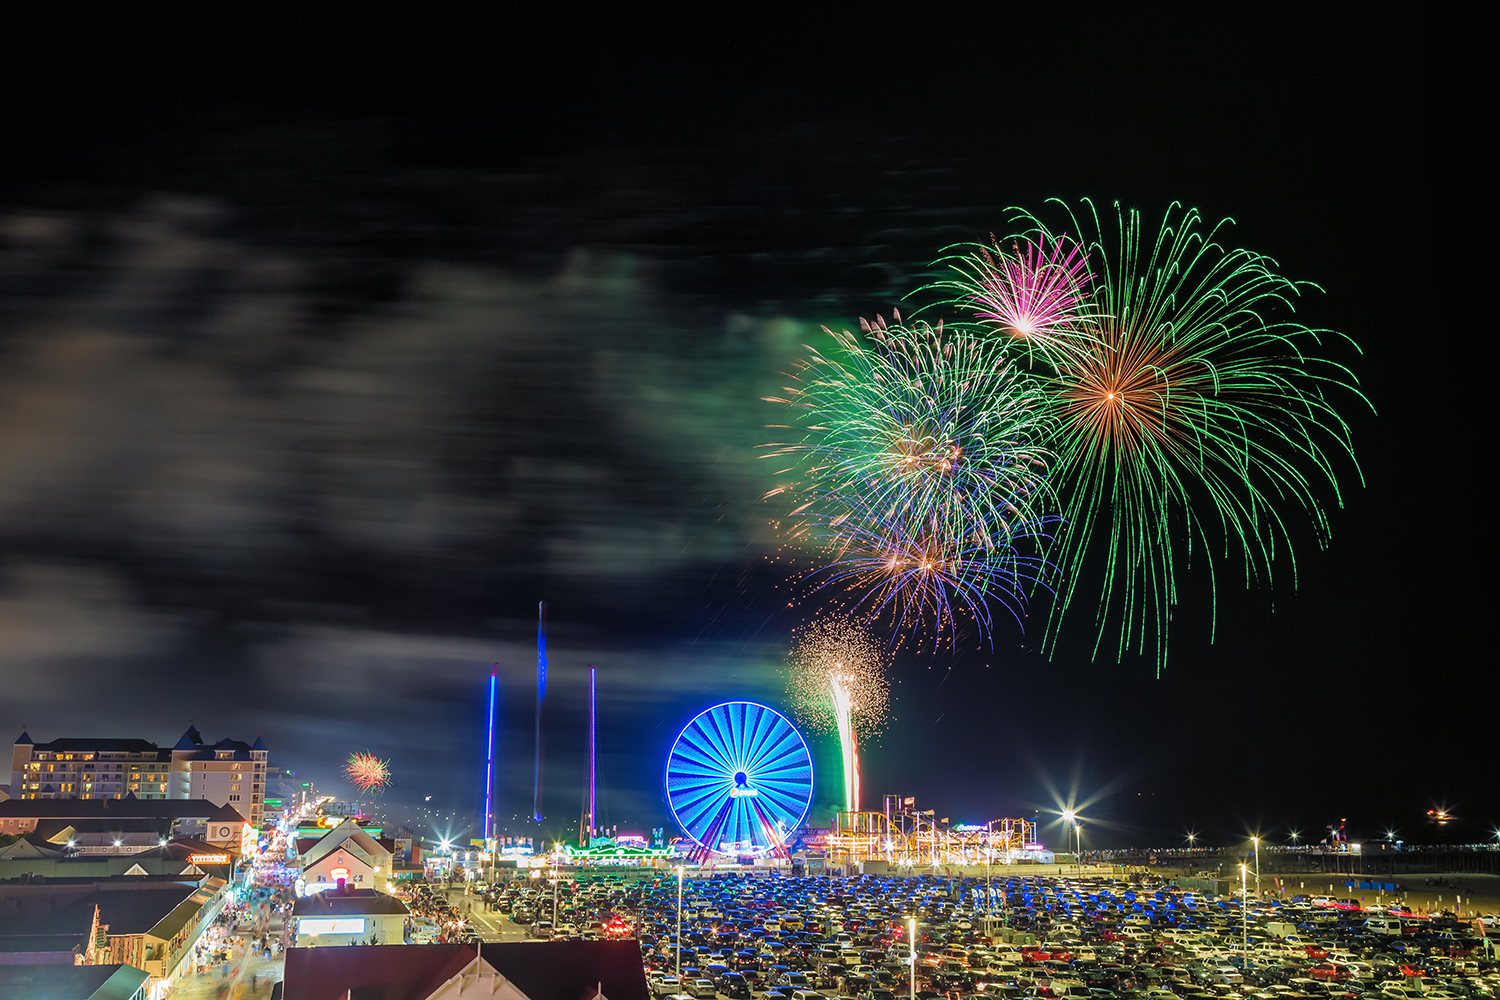 06/28/2022 OC Details Fireworks, Live Music Plans For Holiday Weekend